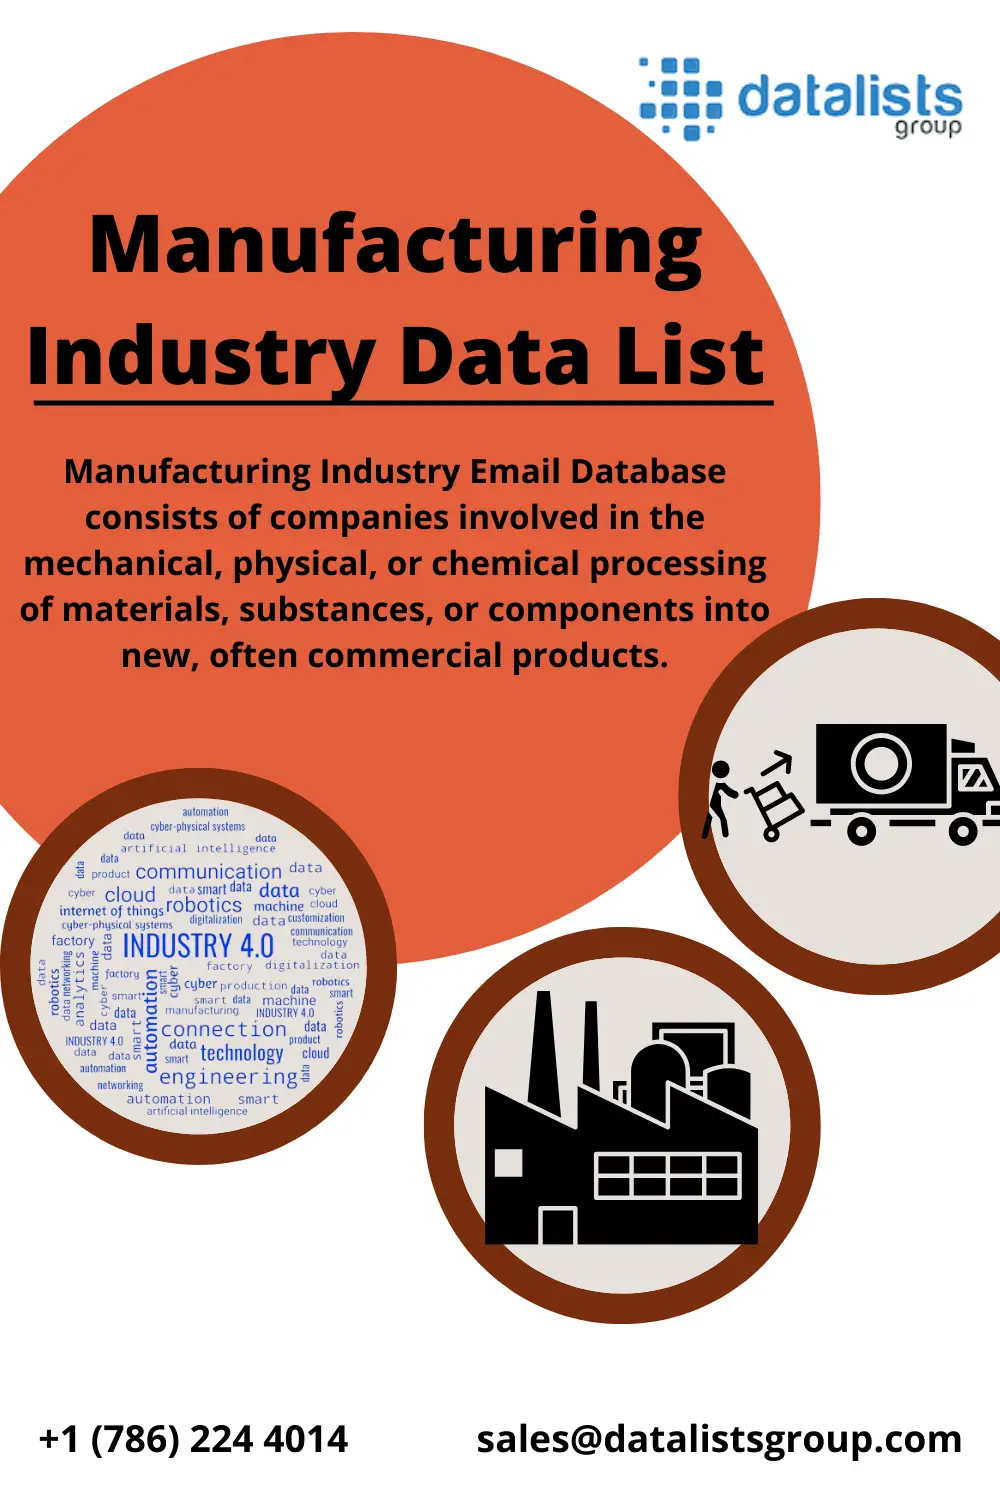 manufacturing Industry database (1)-24f89b7d